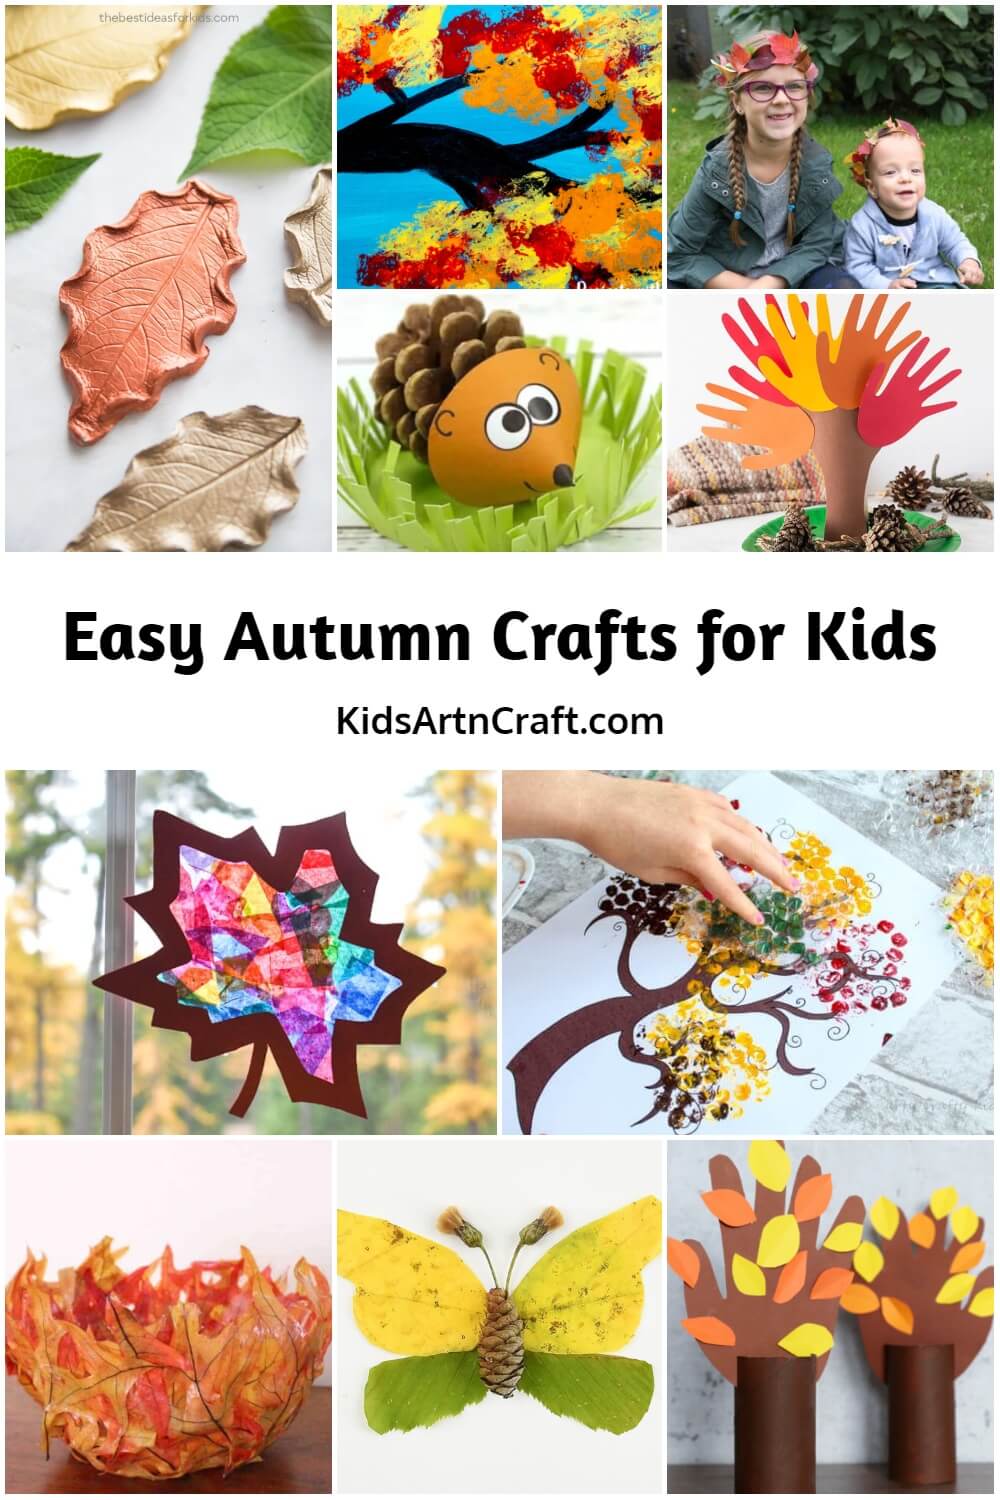 Easy Autumn Crafts for Kids